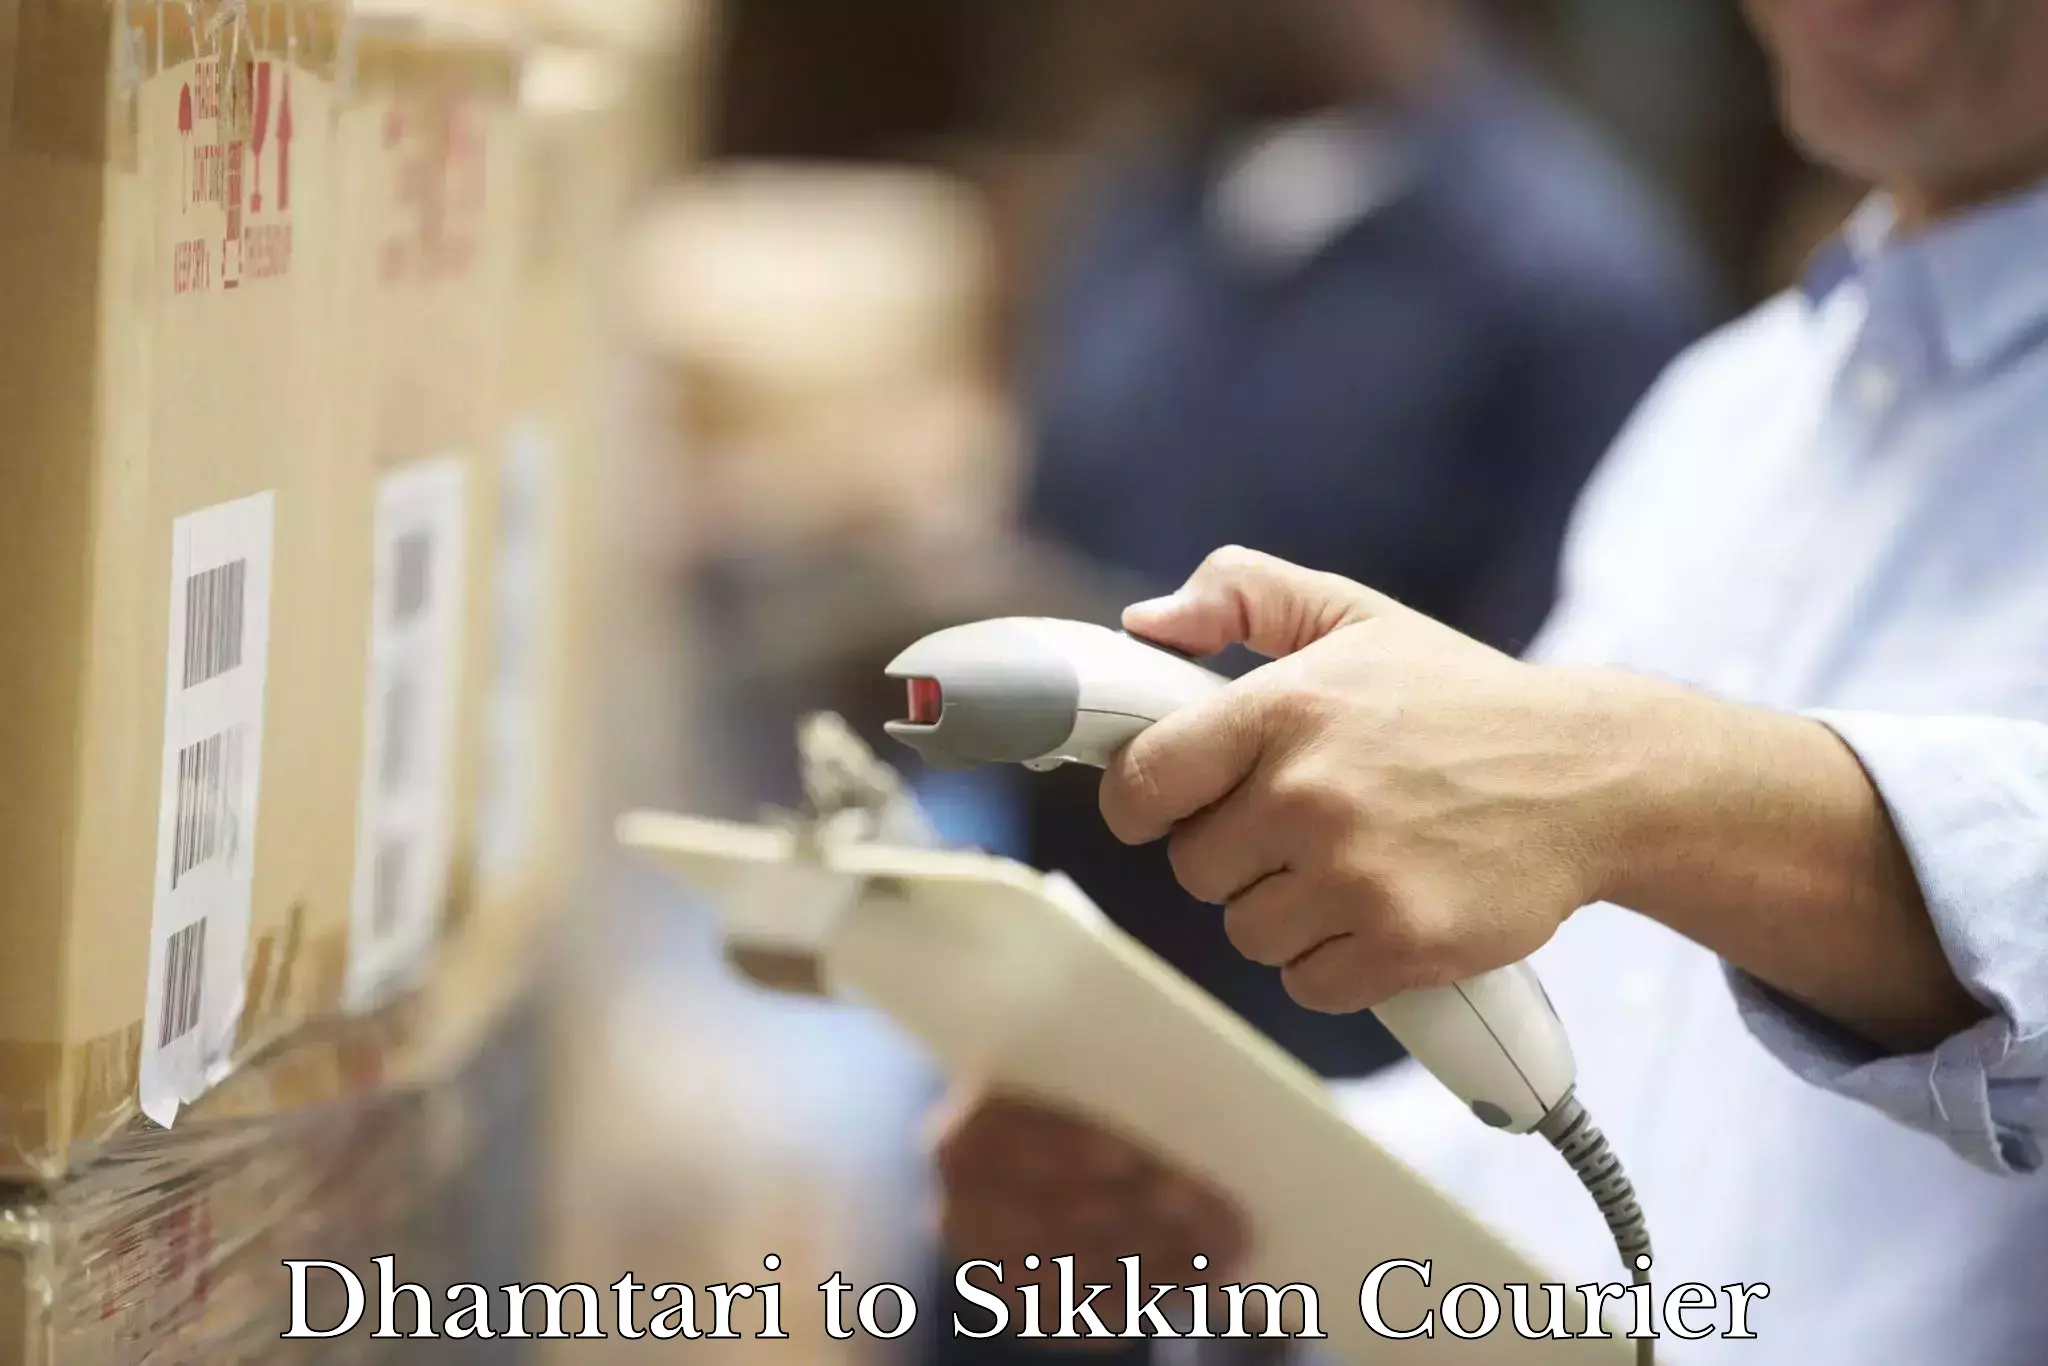 International courier networks Dhamtari to Sikkim